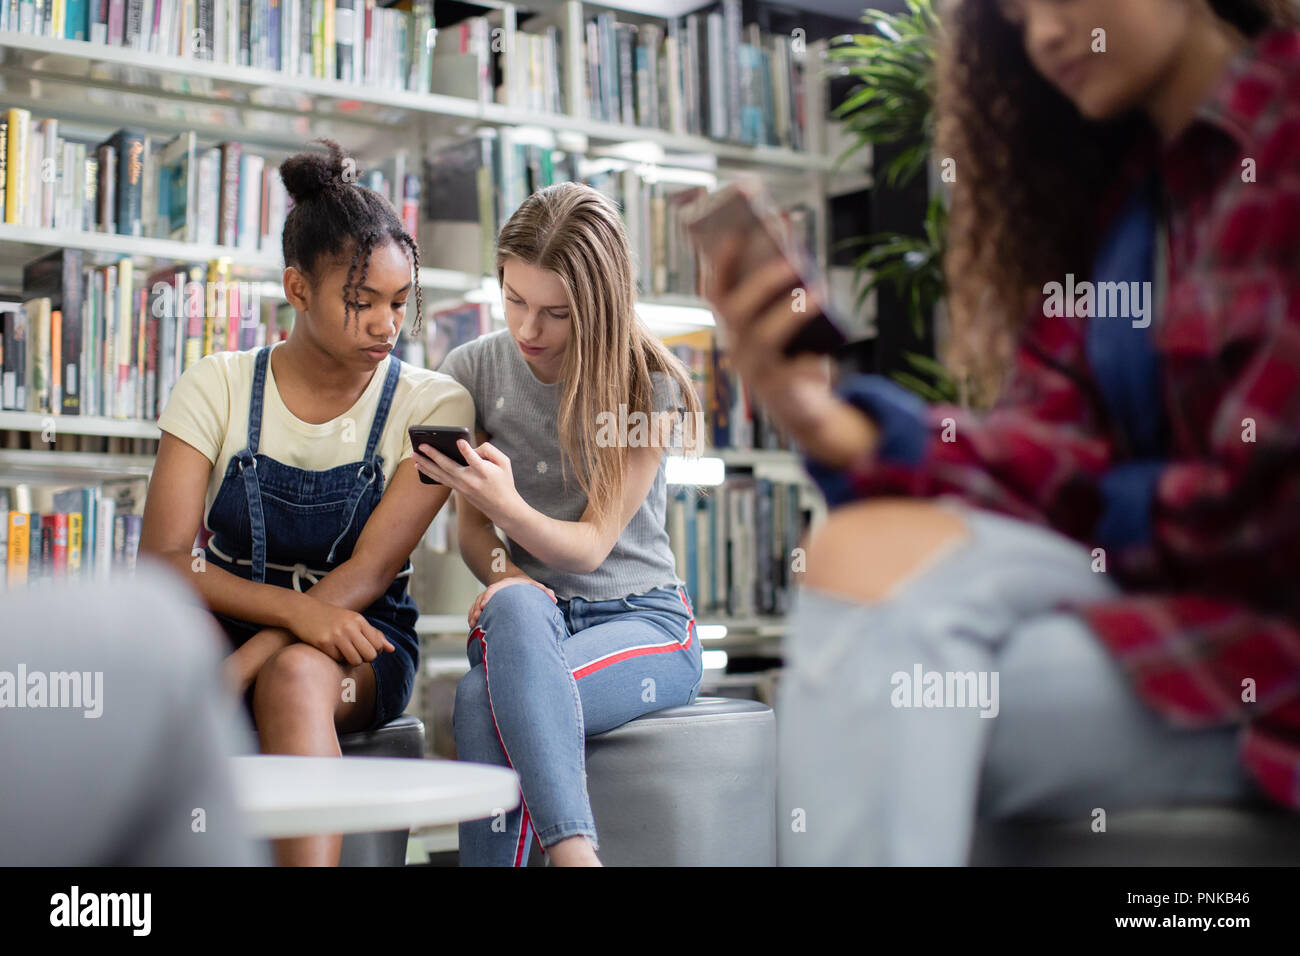 High school students looking at smartphone in a library Stock Photo